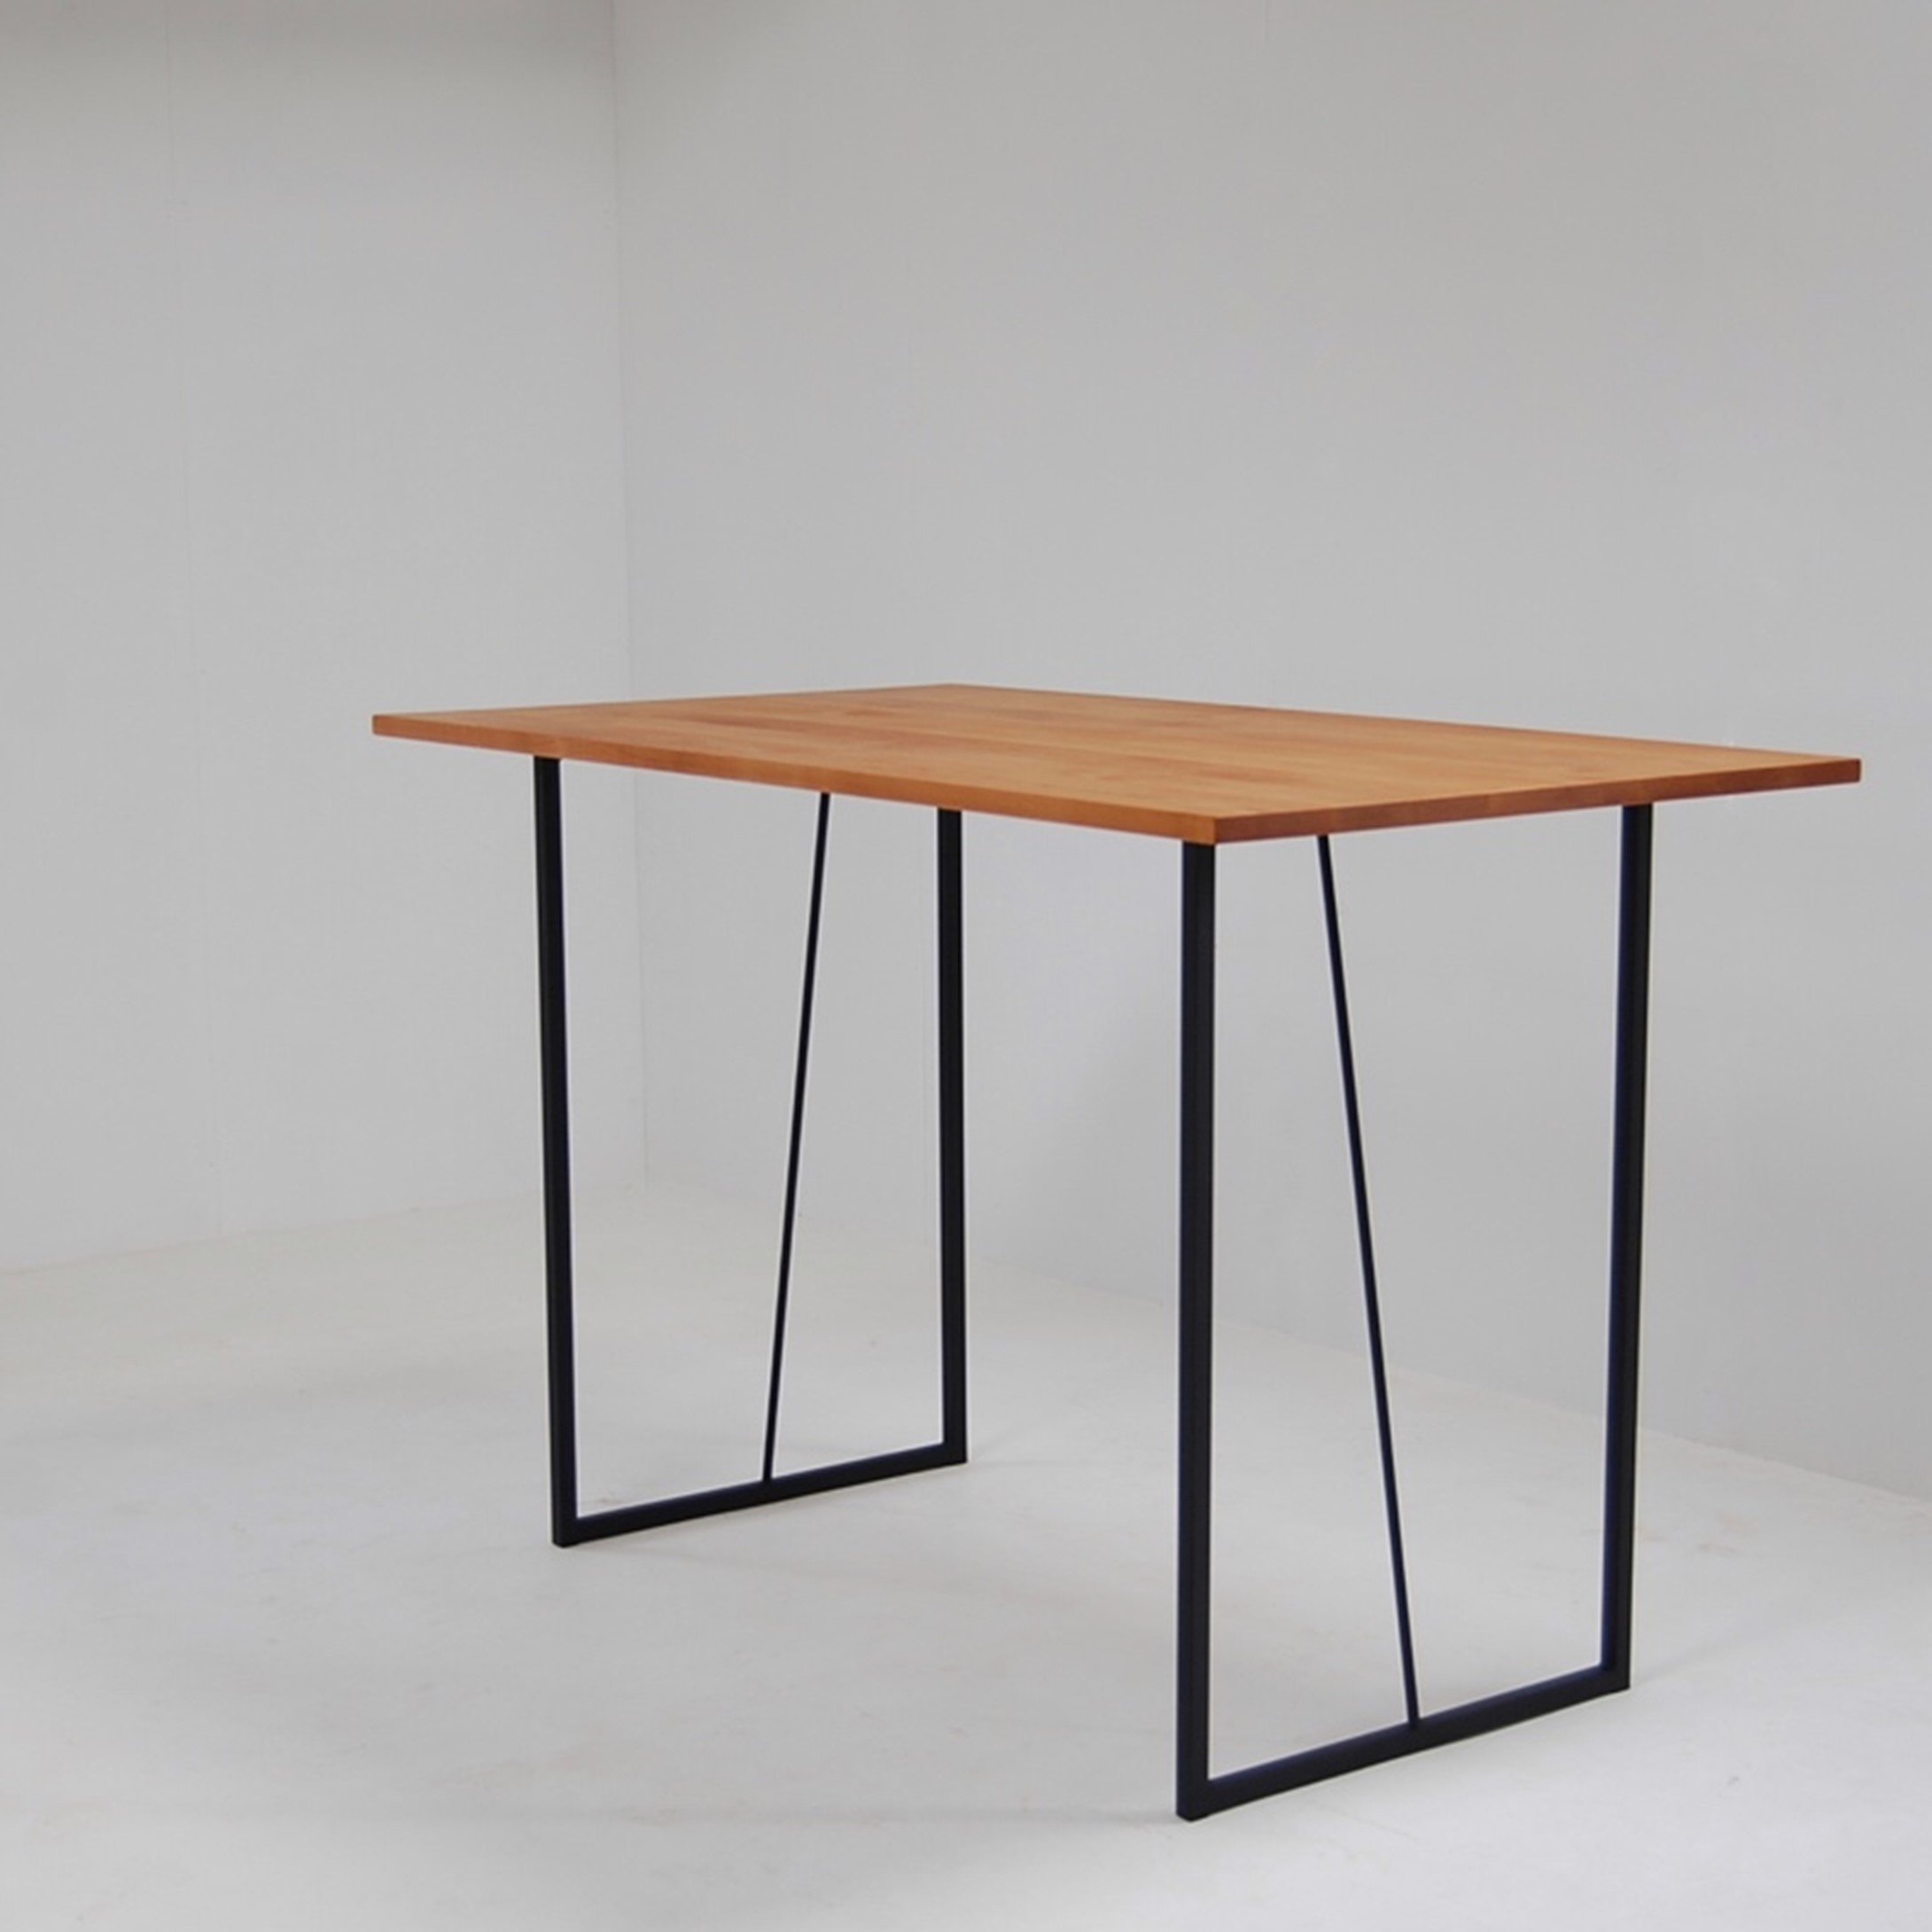 Standing work table